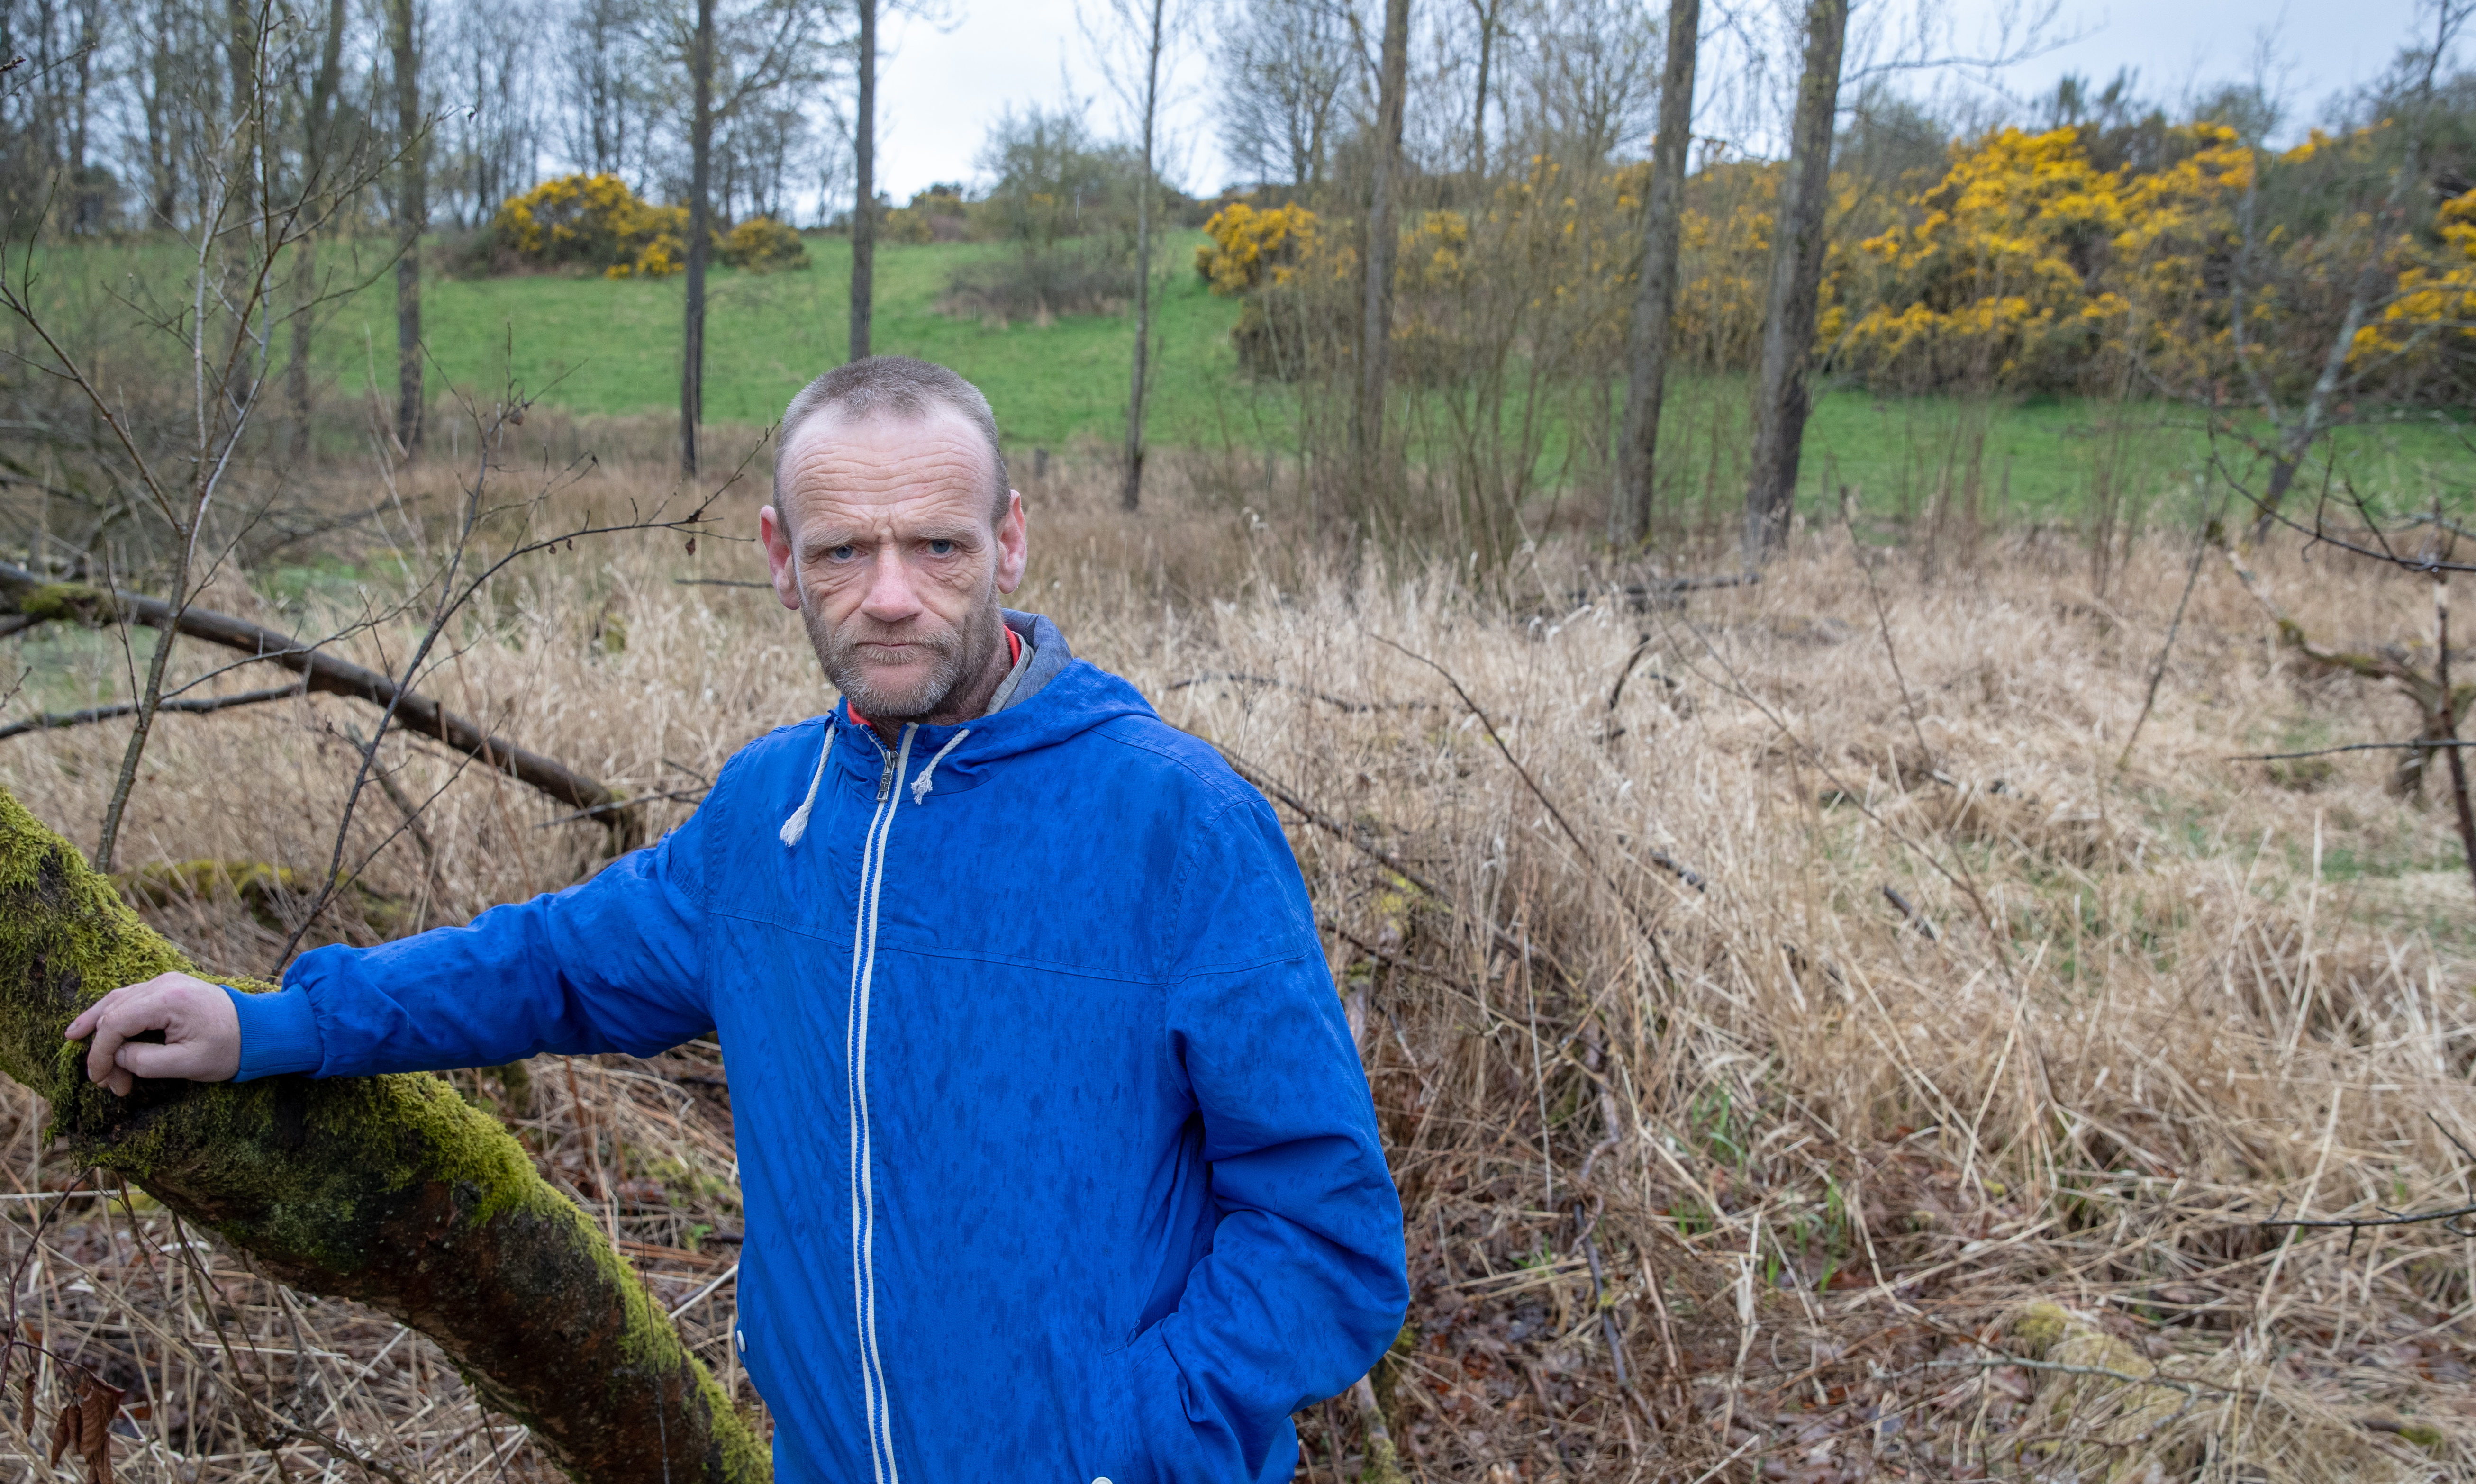 Jason David stands at the spot where a dog mauled a deer to death in Lochore.